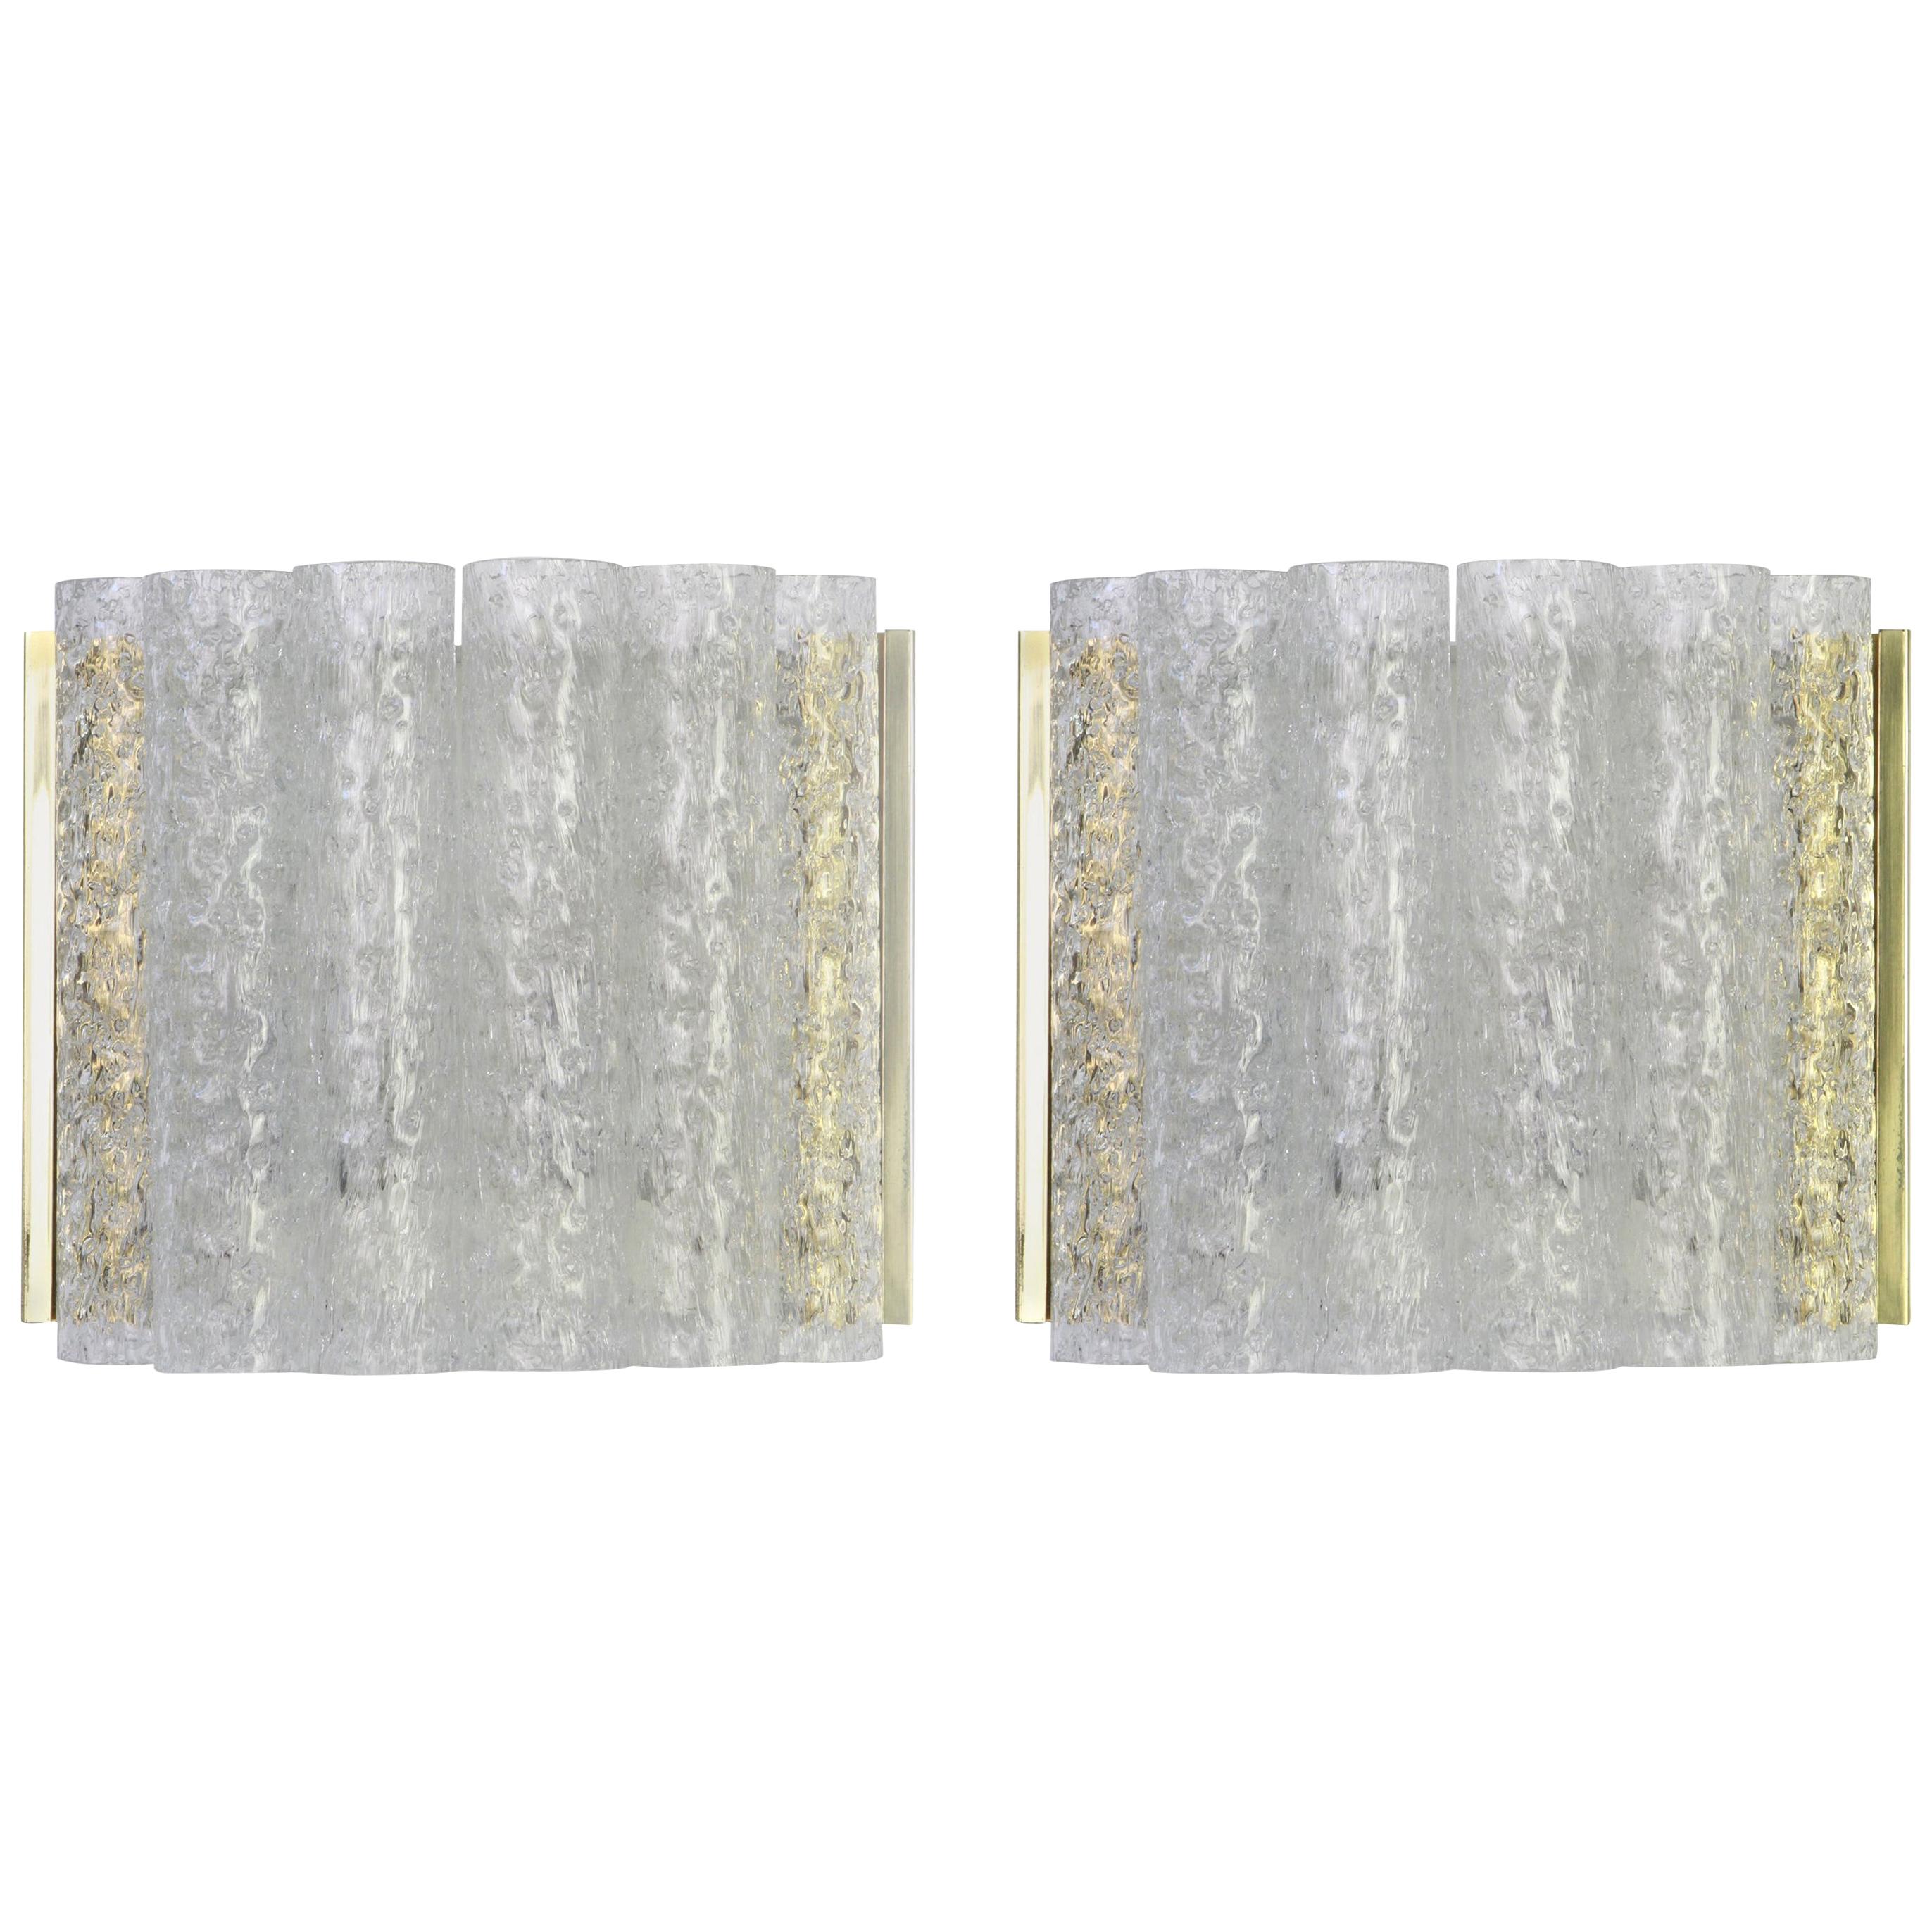 Pair of Brass or Ice Glass Wall Sconces by Doria, Germany, 1960s For Sale